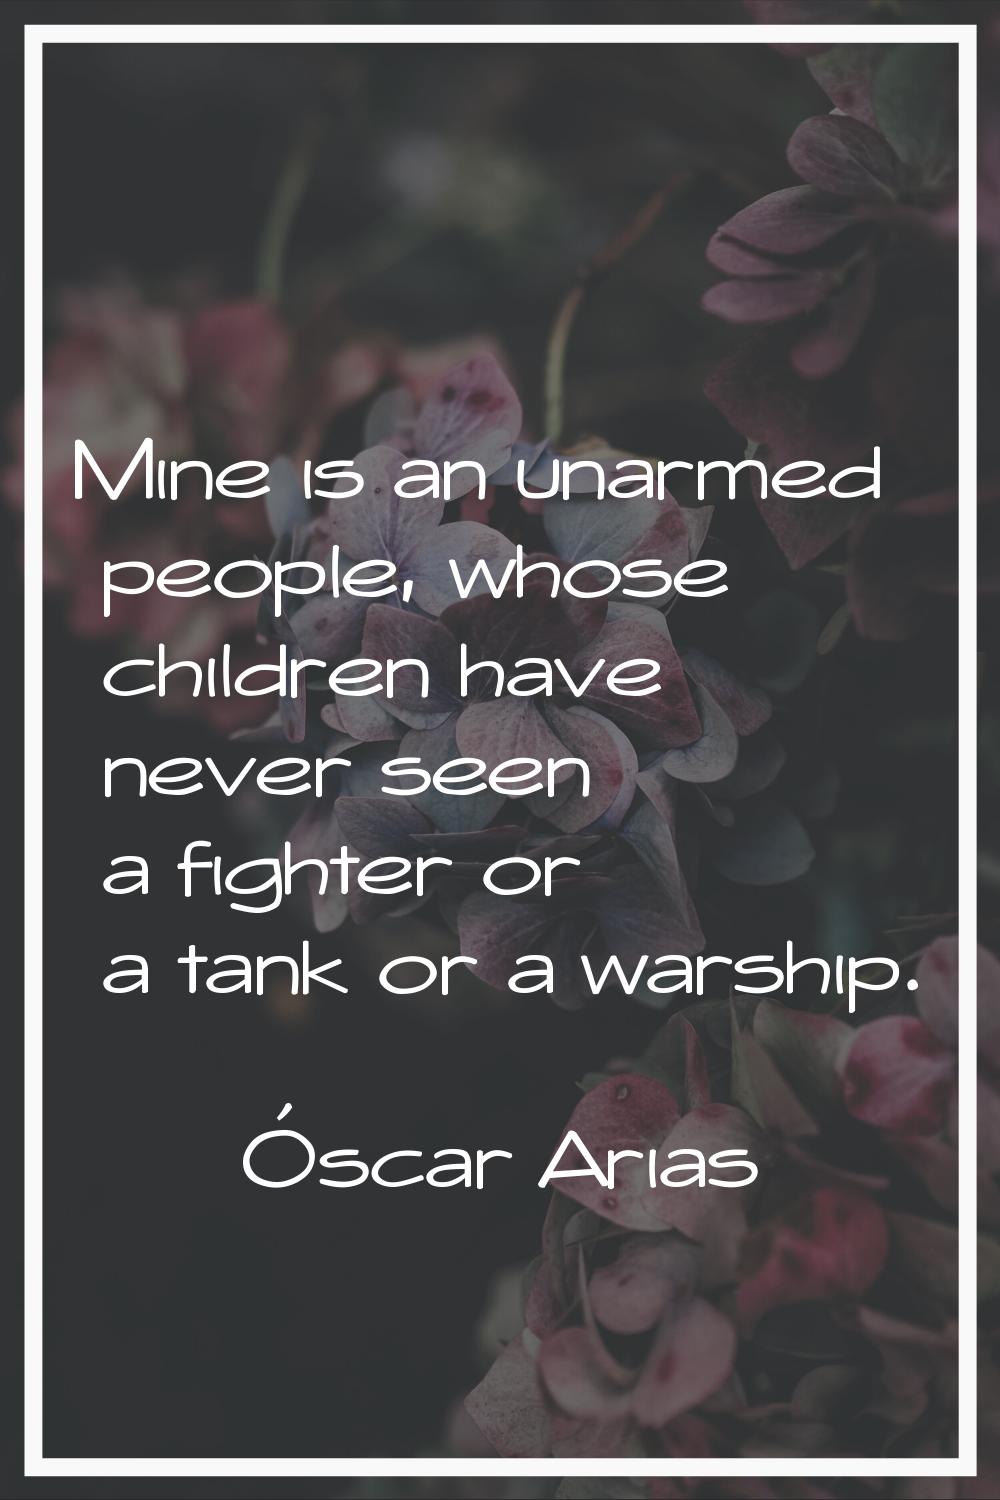 Mine is an unarmed people, whose children have never seen a fighter or a tank or a warship.